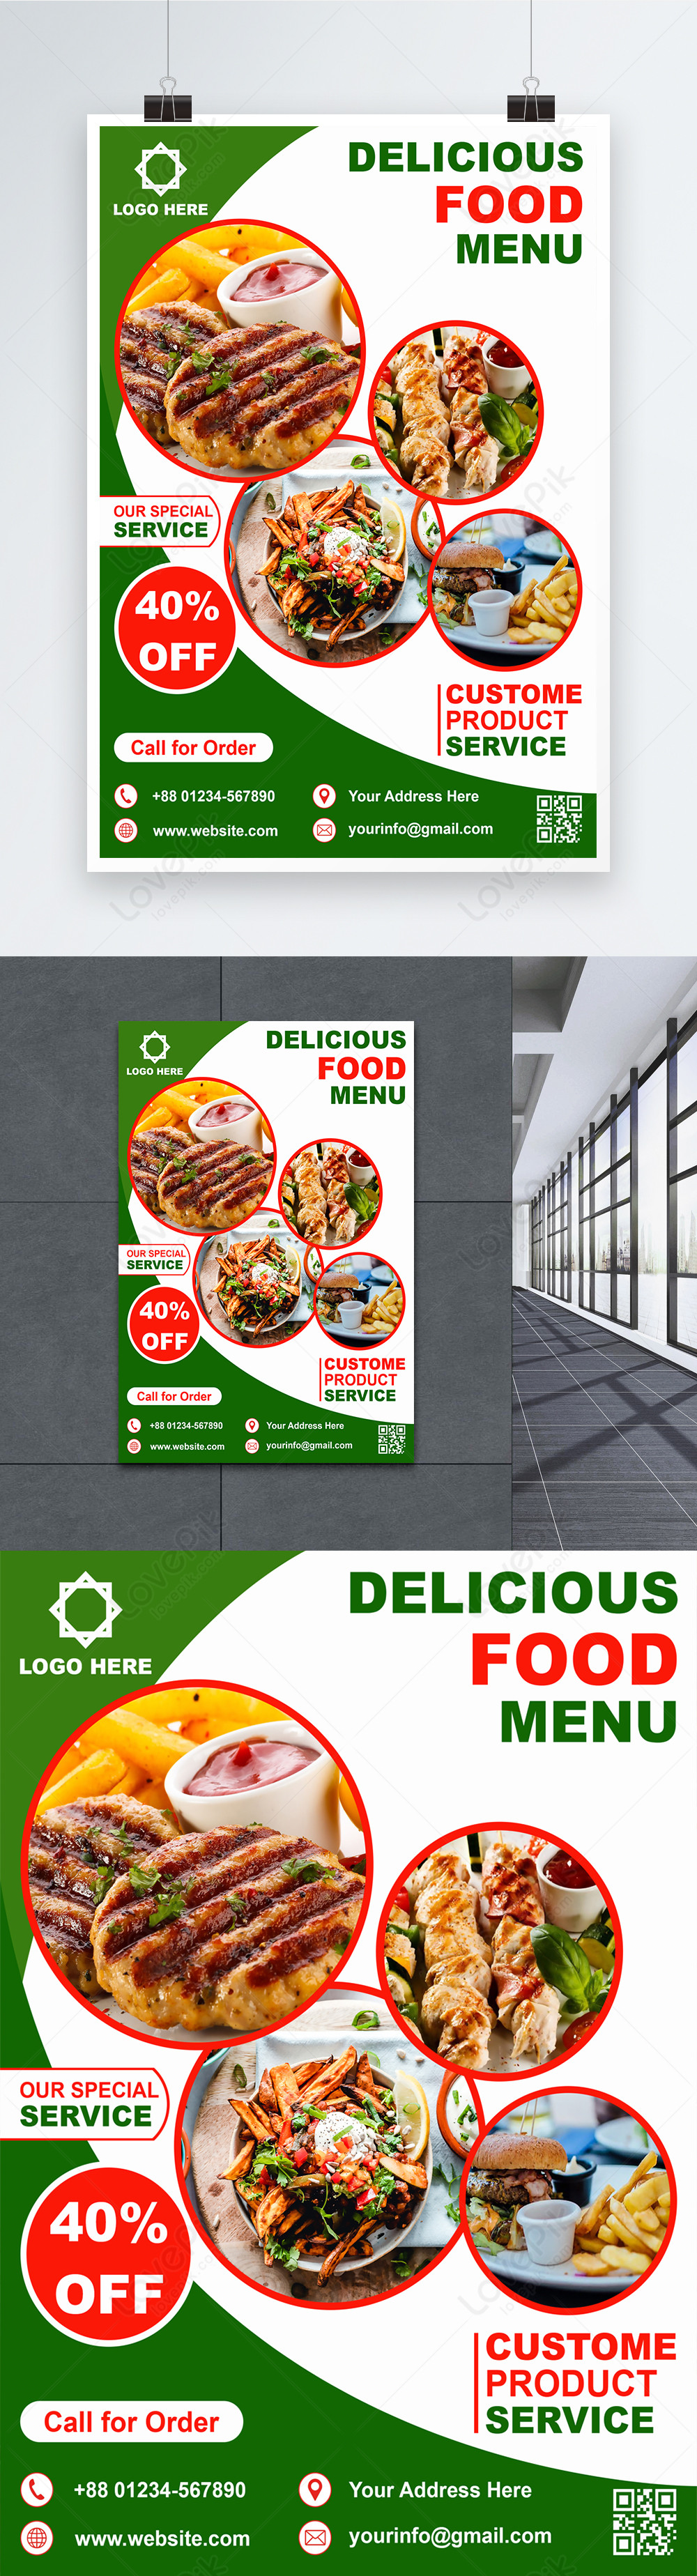 Food poster template image_picture free download